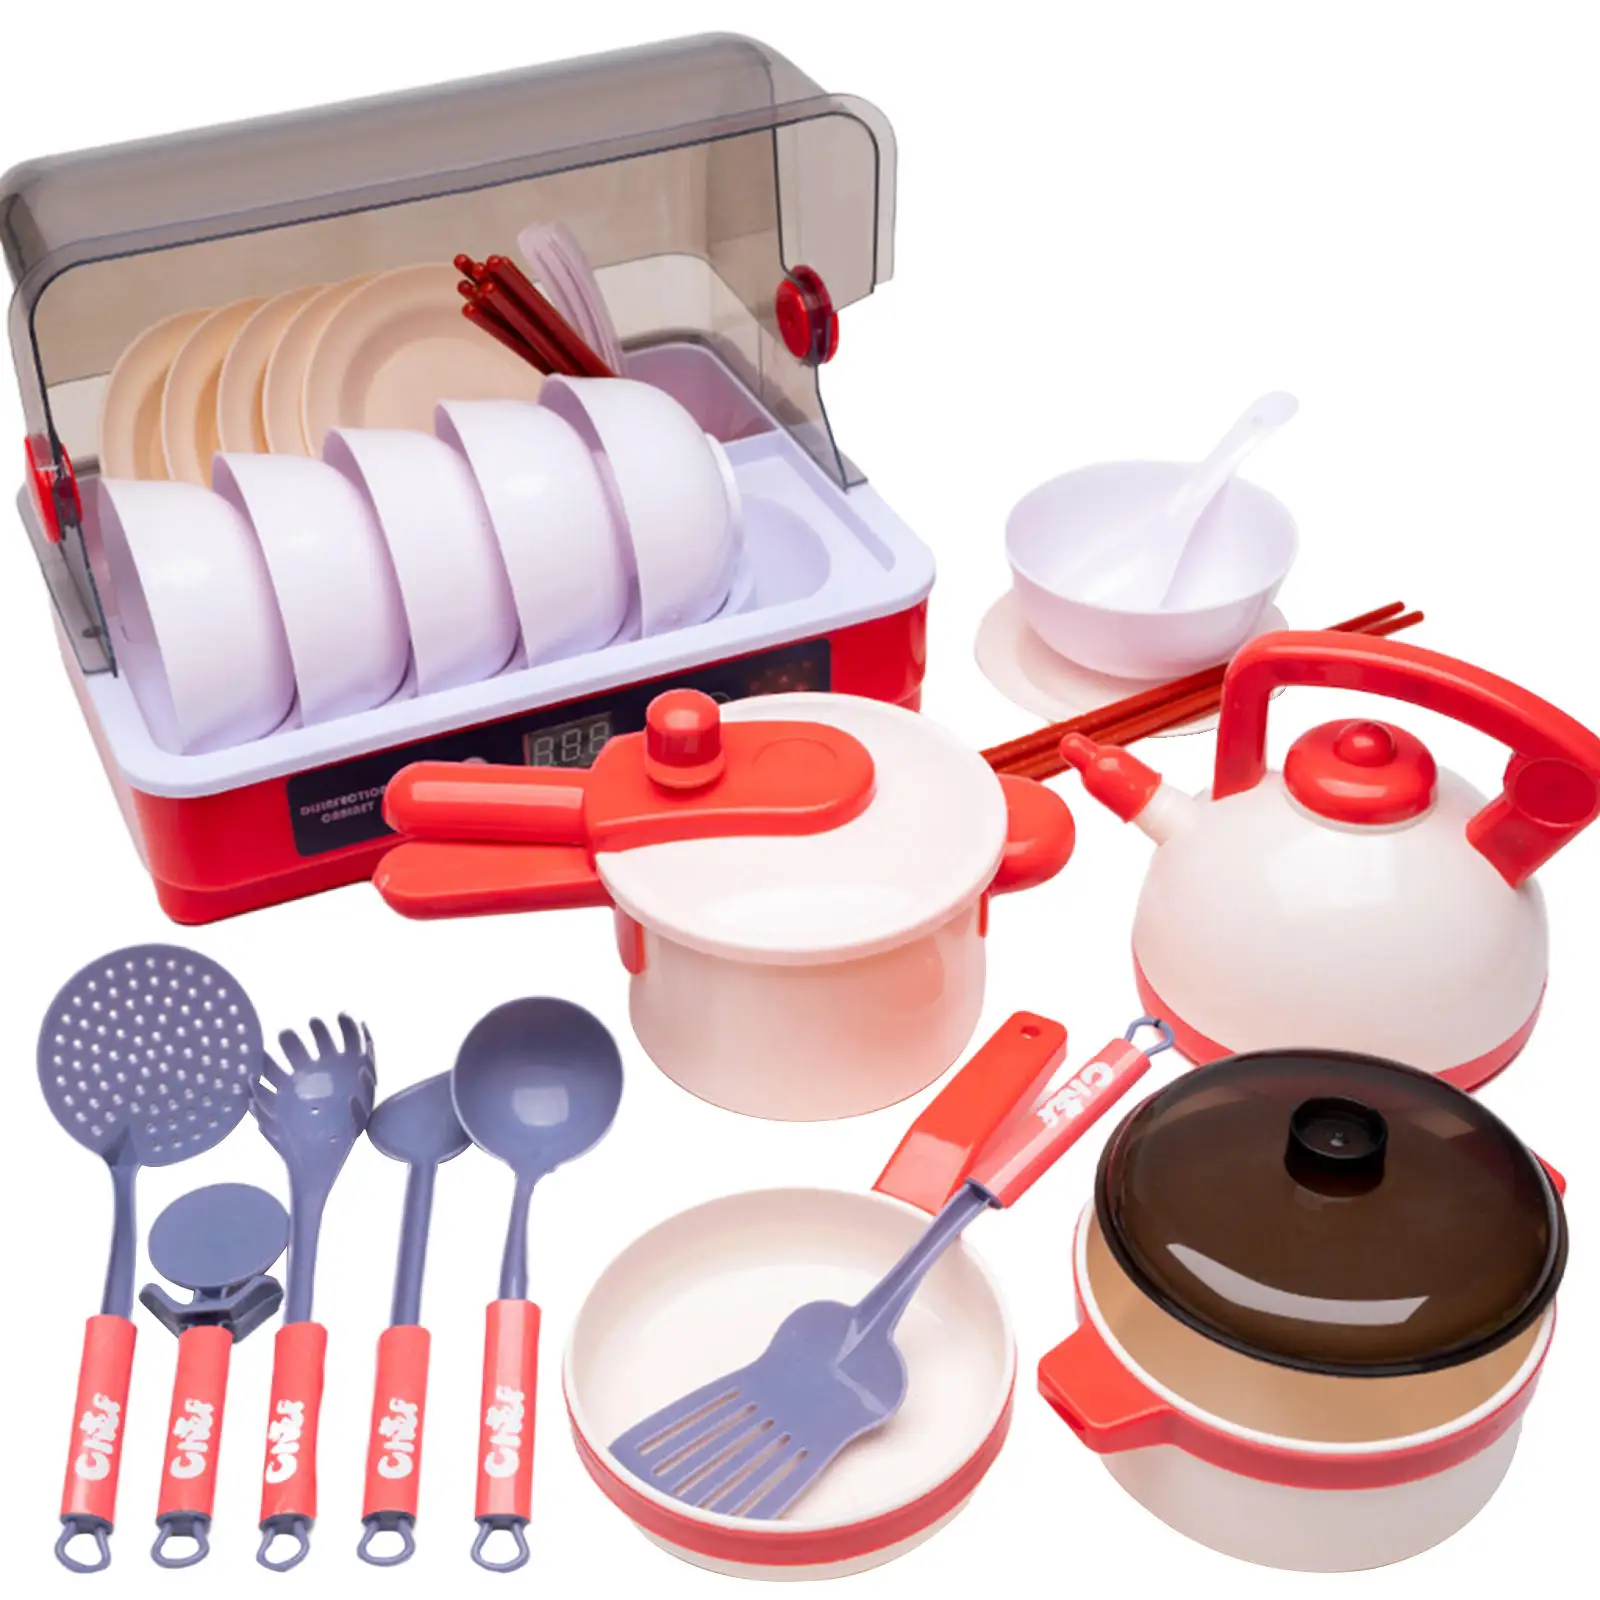 Kitchen Pretend Play Set Utensils Cooking Toy for Girls Boys Toddler Birthday Gifts